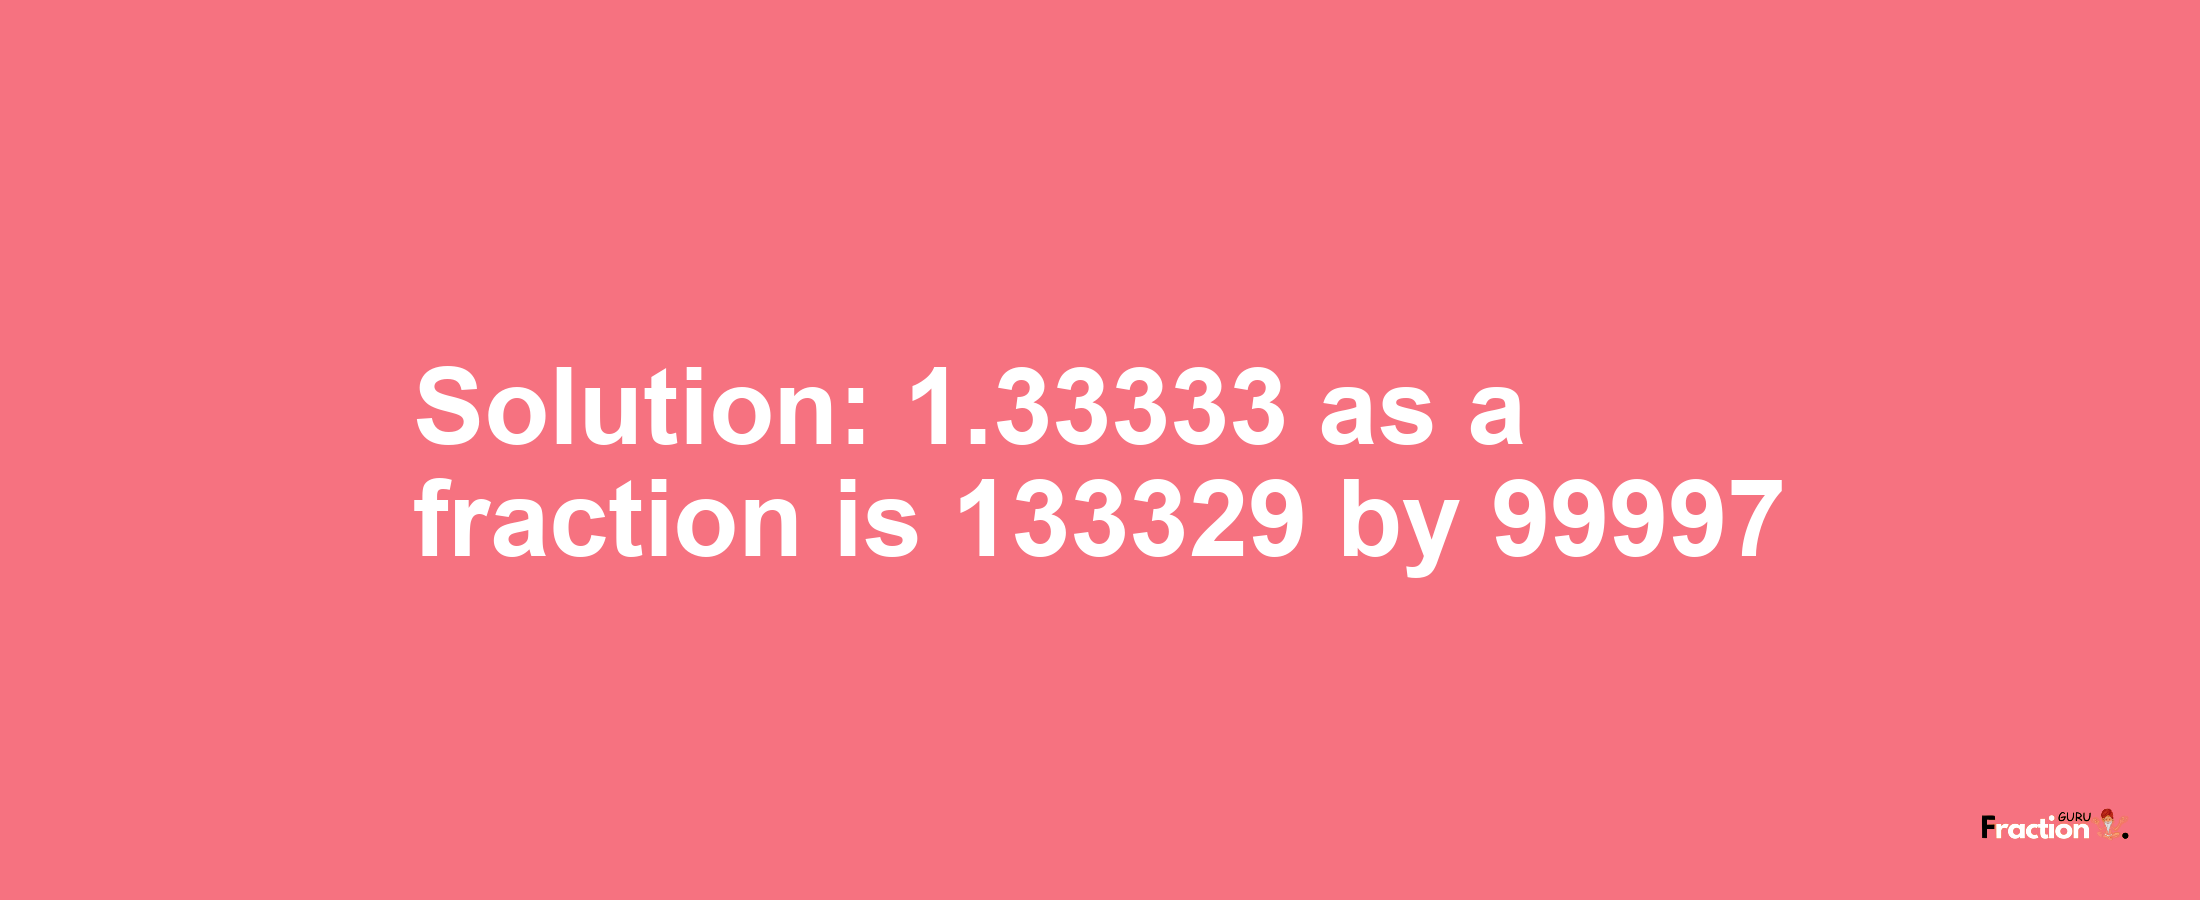 Solution:1.33333 as a fraction is 133329/99997